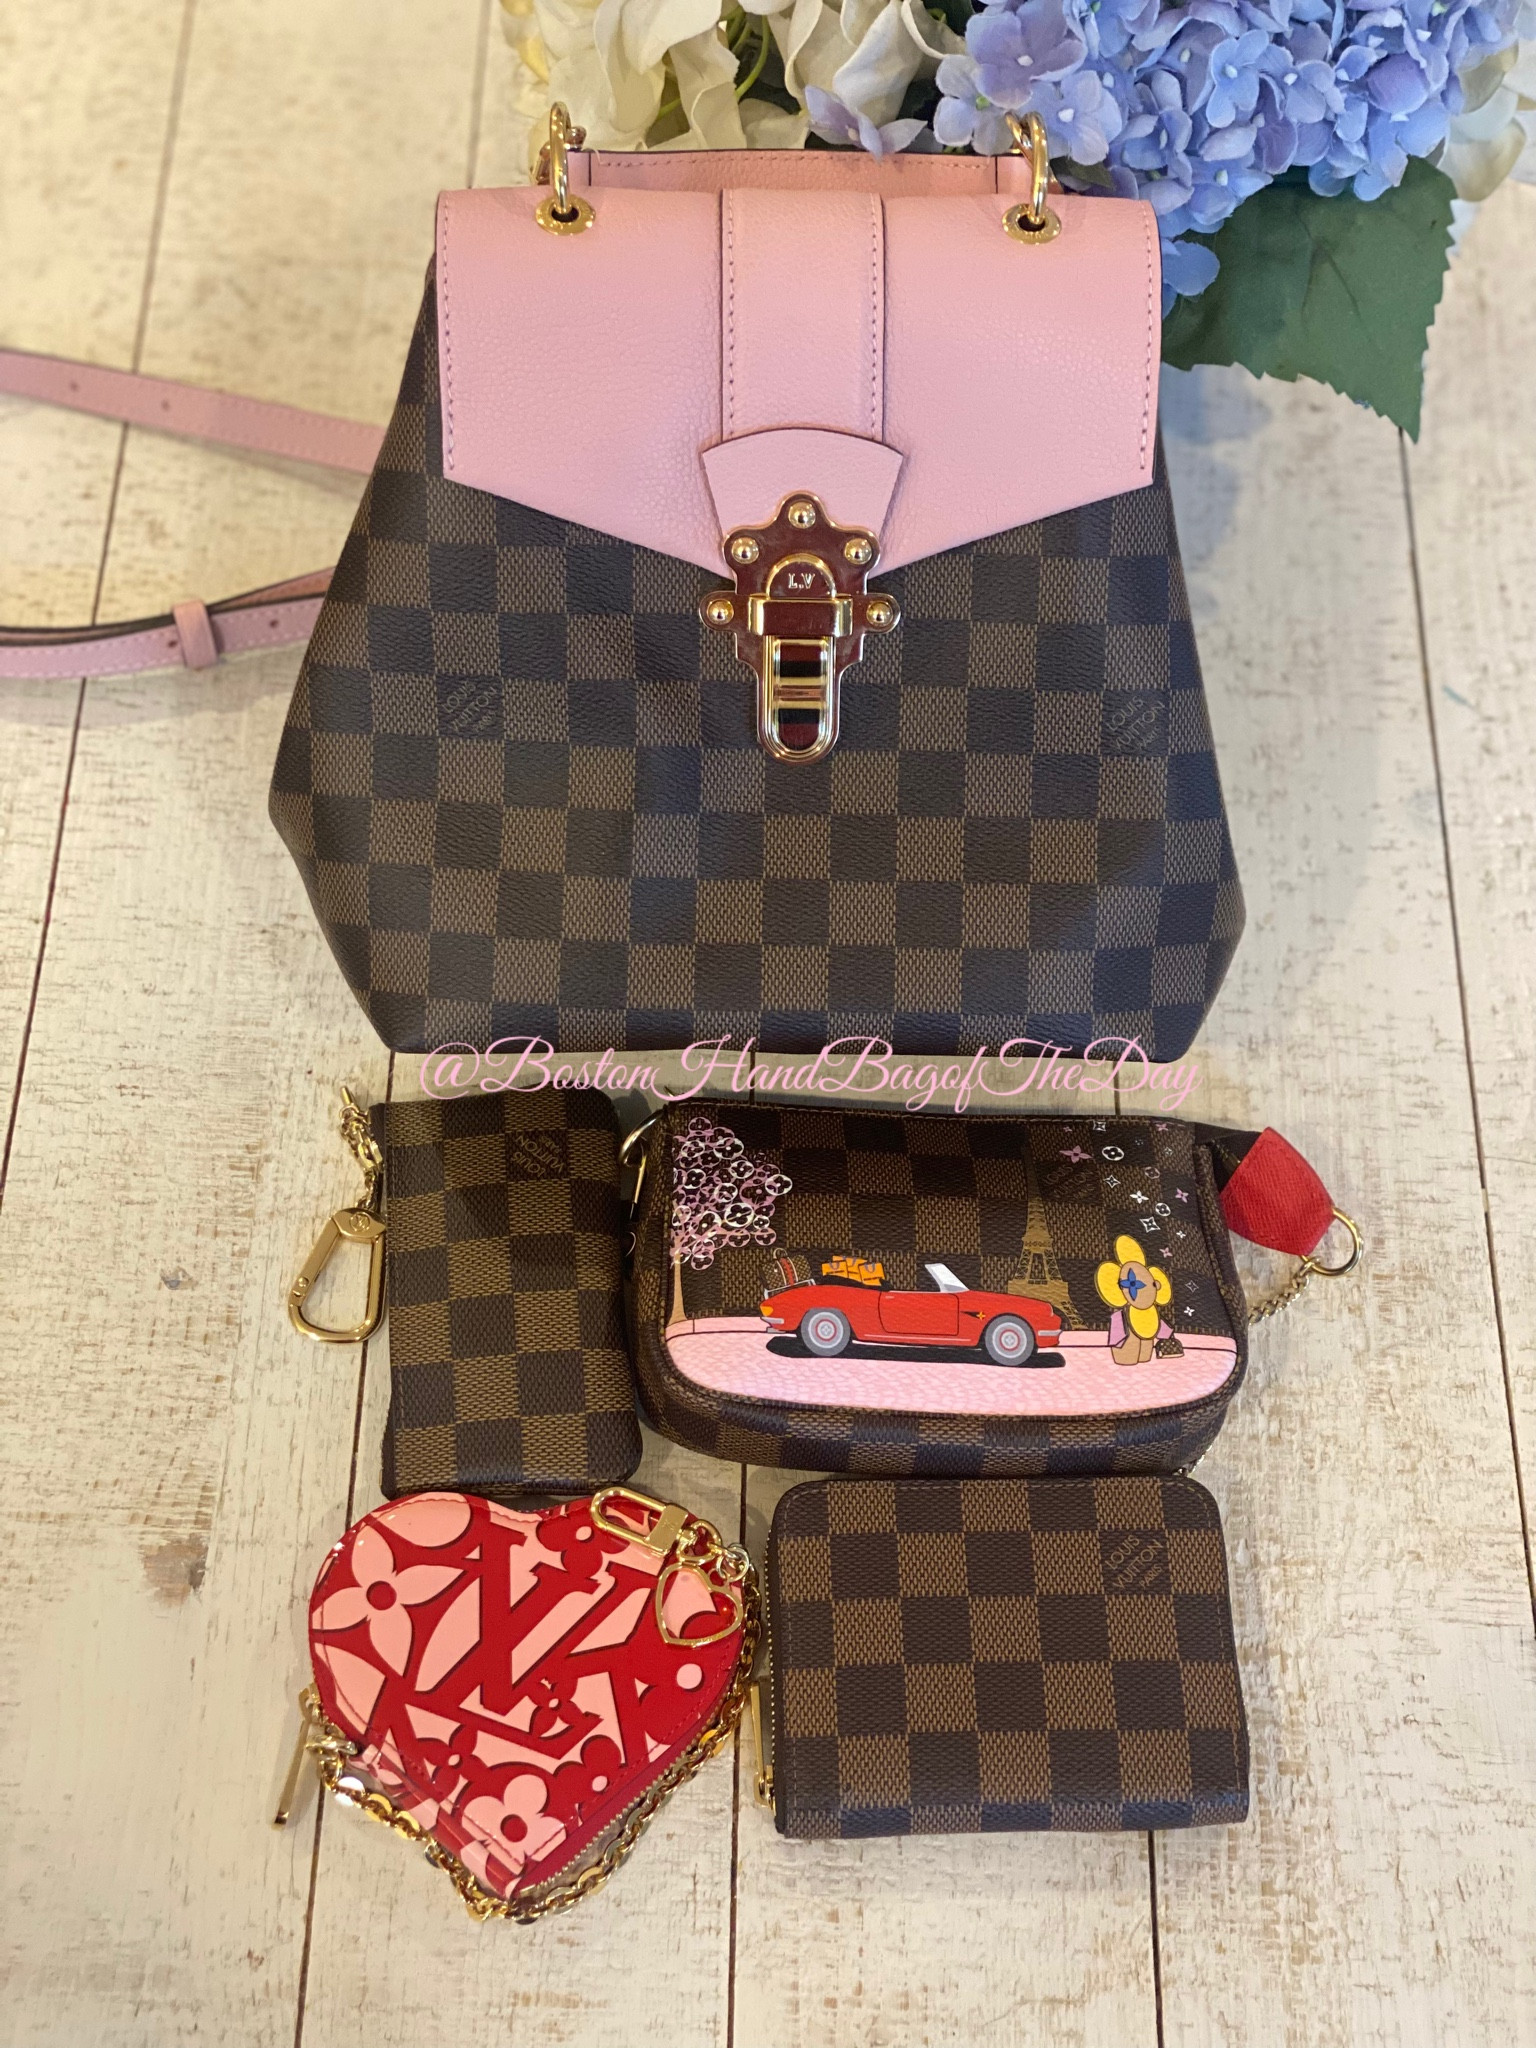 Louis Vuitton Zippy coin wallet review and Cles in empreinte 